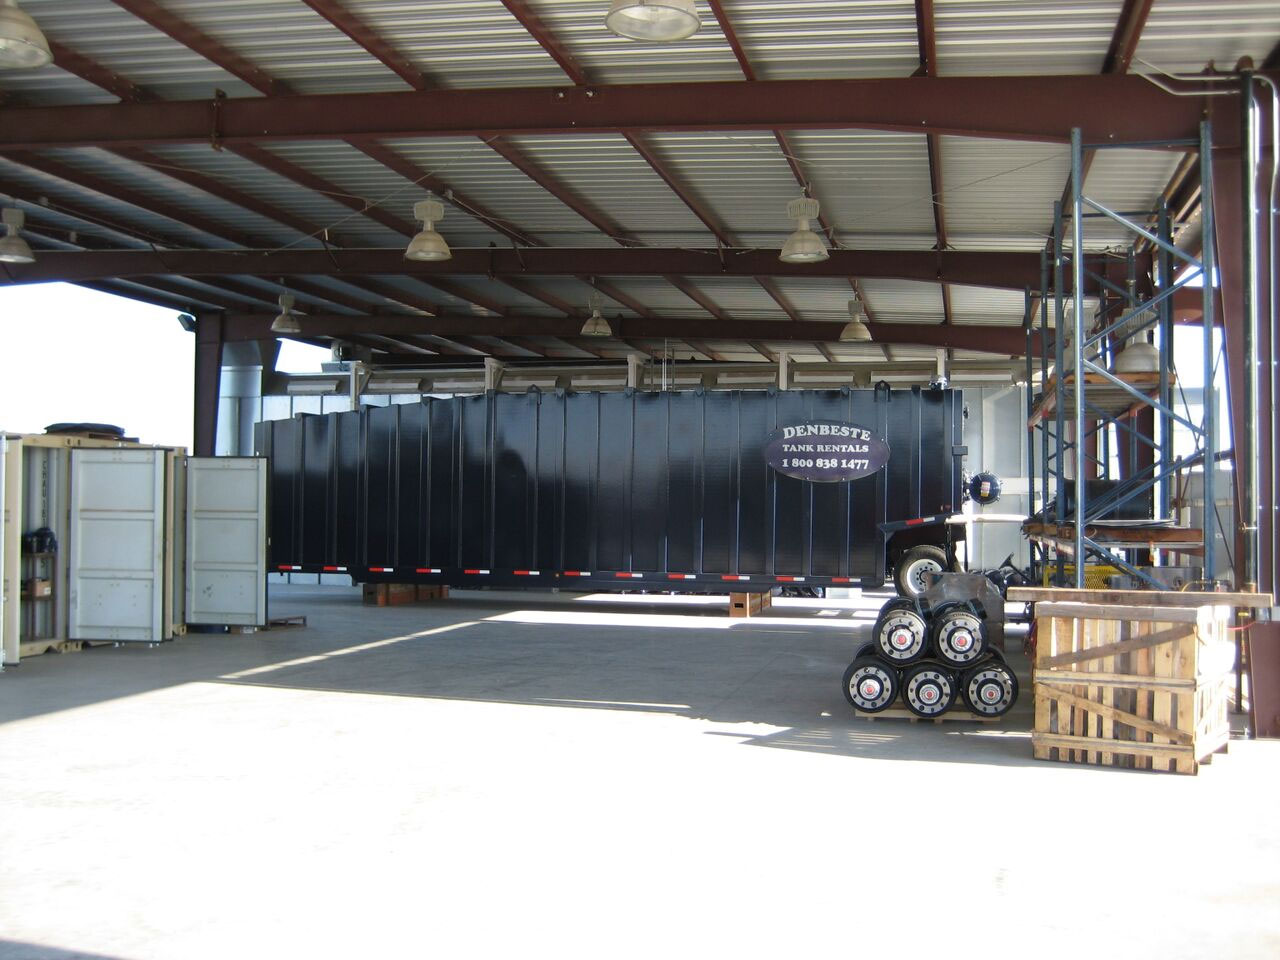 Custom tanks and trailers are available at DenBeste Manufacturing.